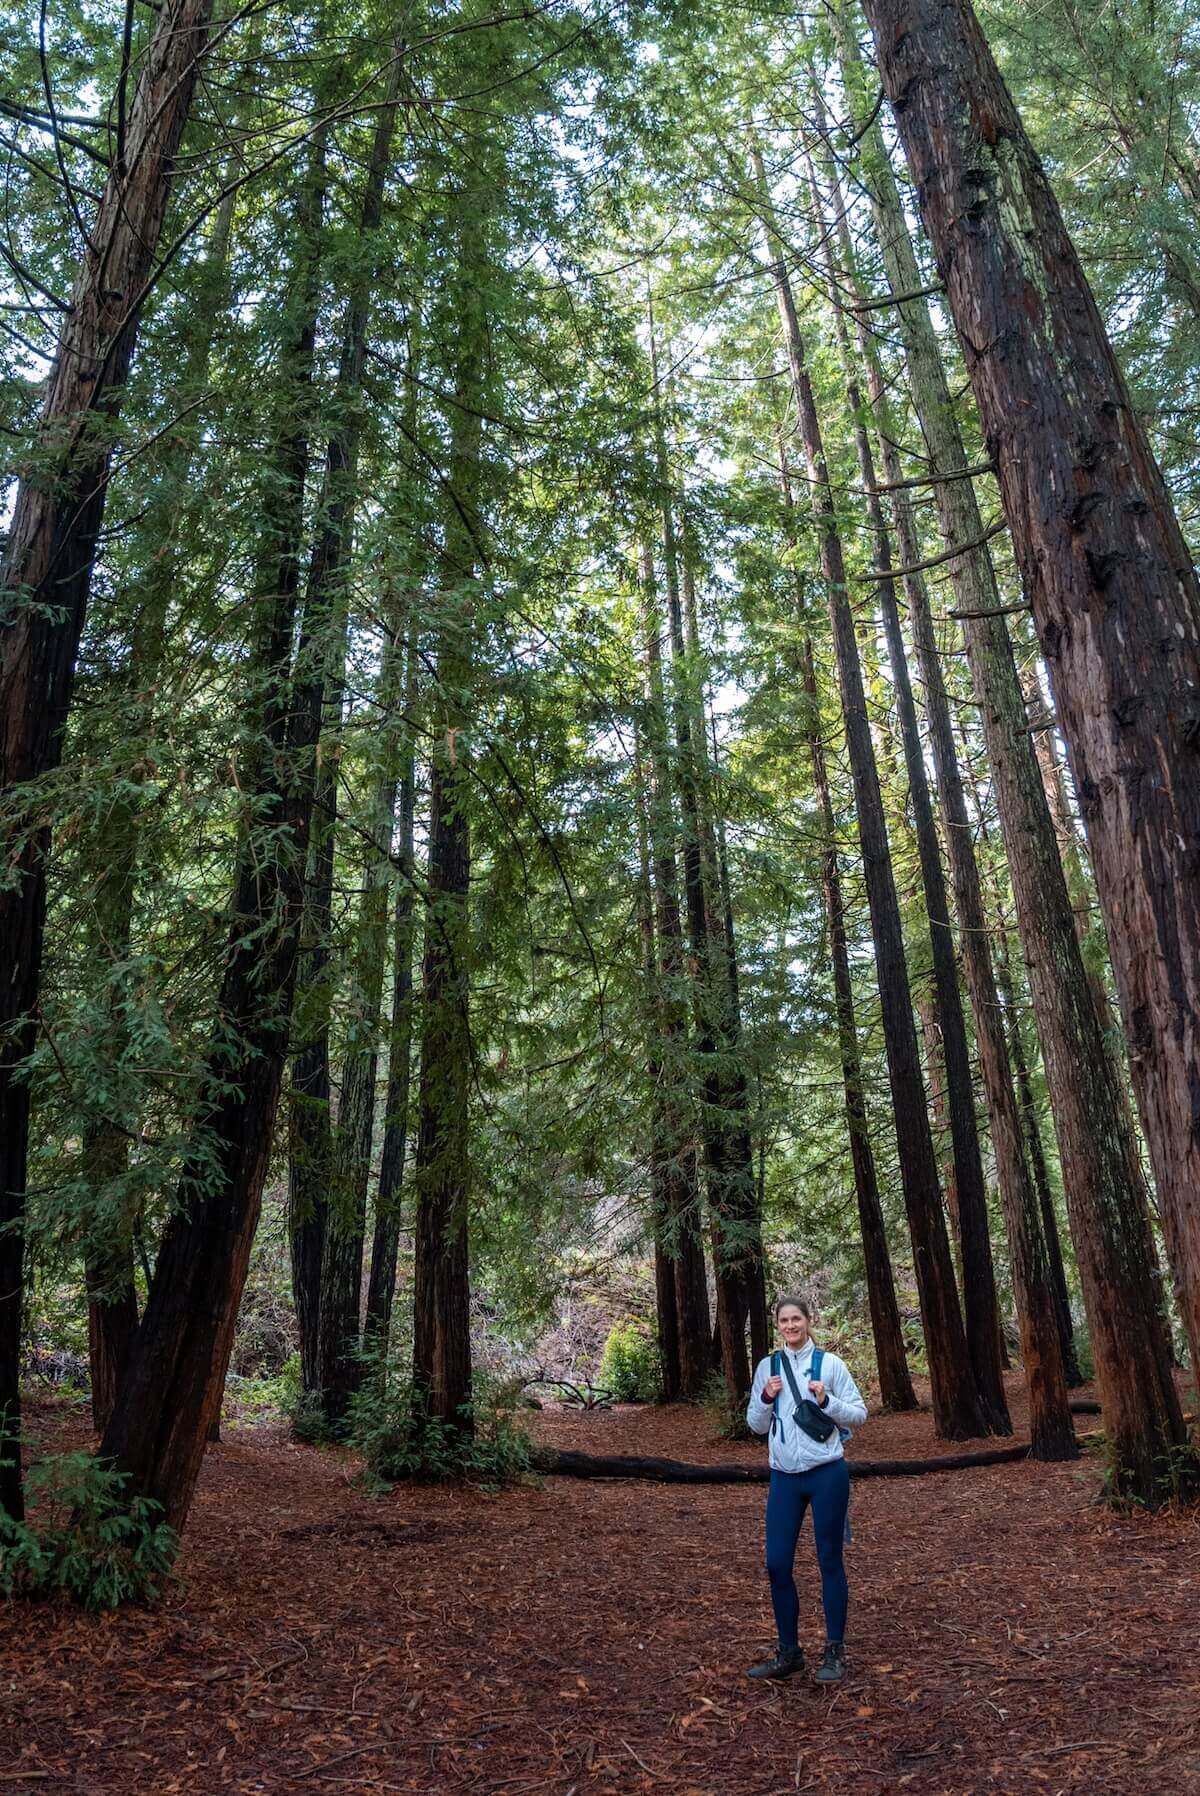 A female hiker stands facing the camera amidst a dense grove of tall, thin, redwoods in Reinhardt Redwood Regional Park.